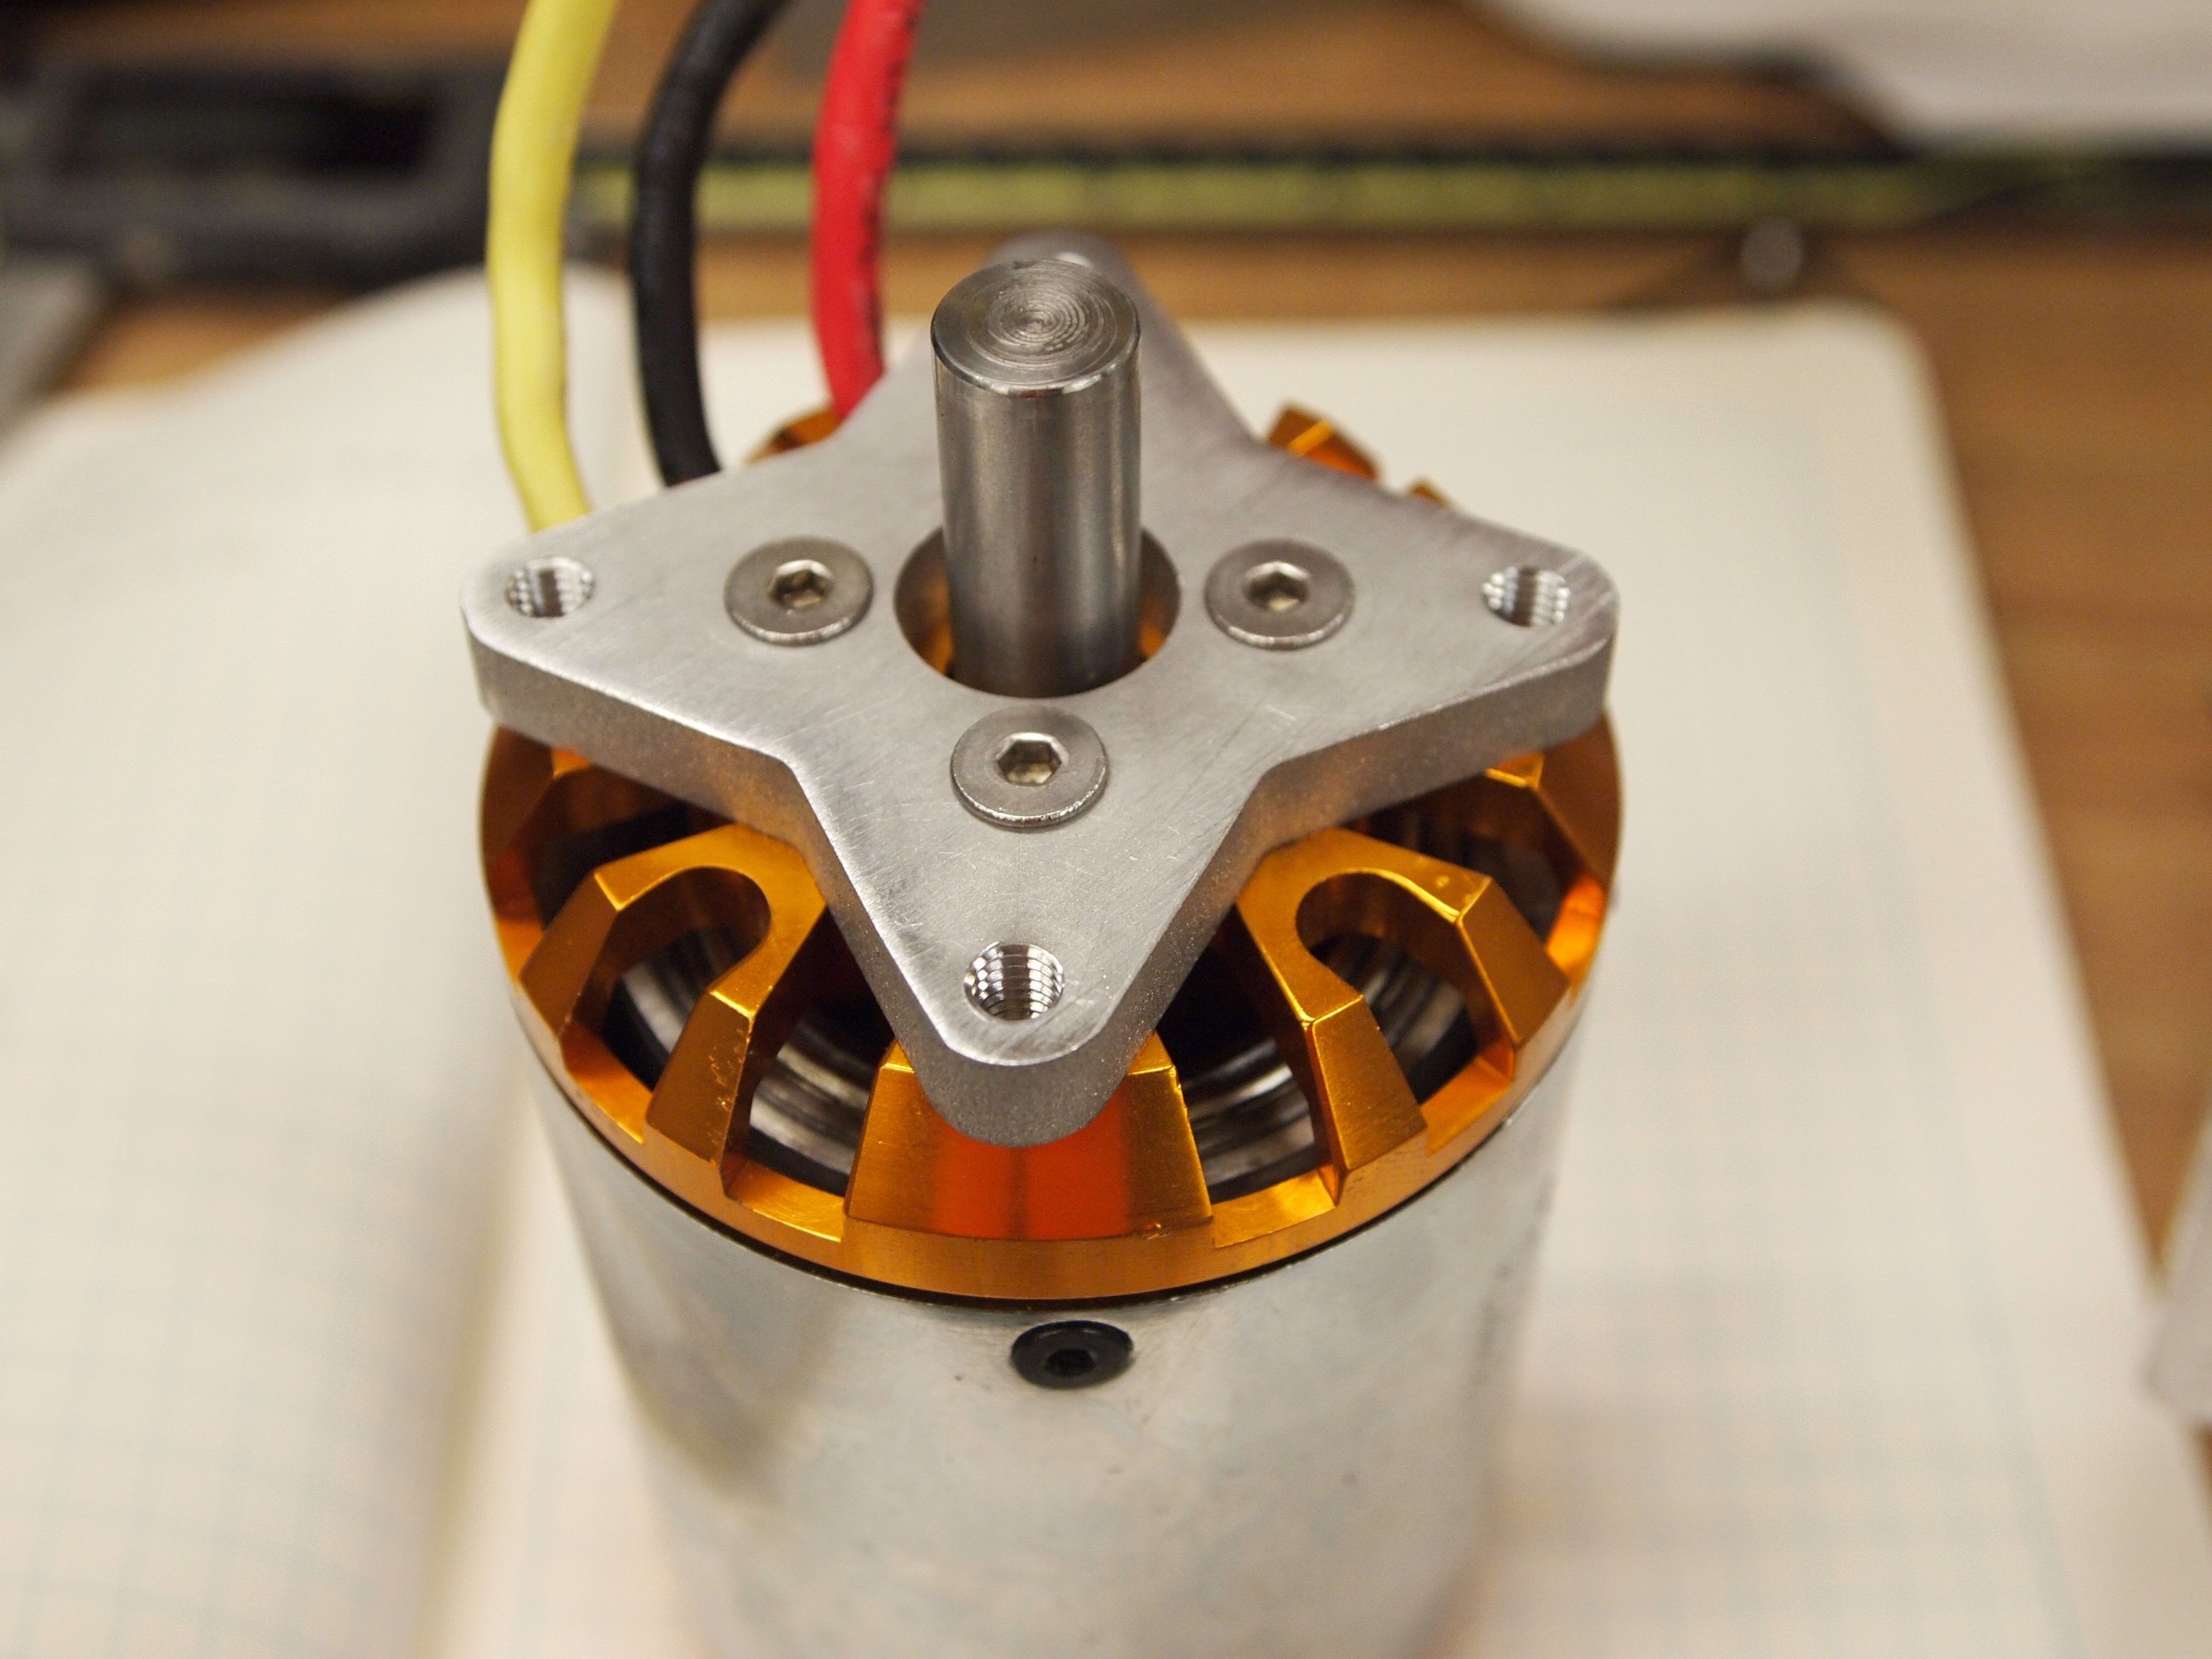  The motor mount attached to the large brushless motor.  